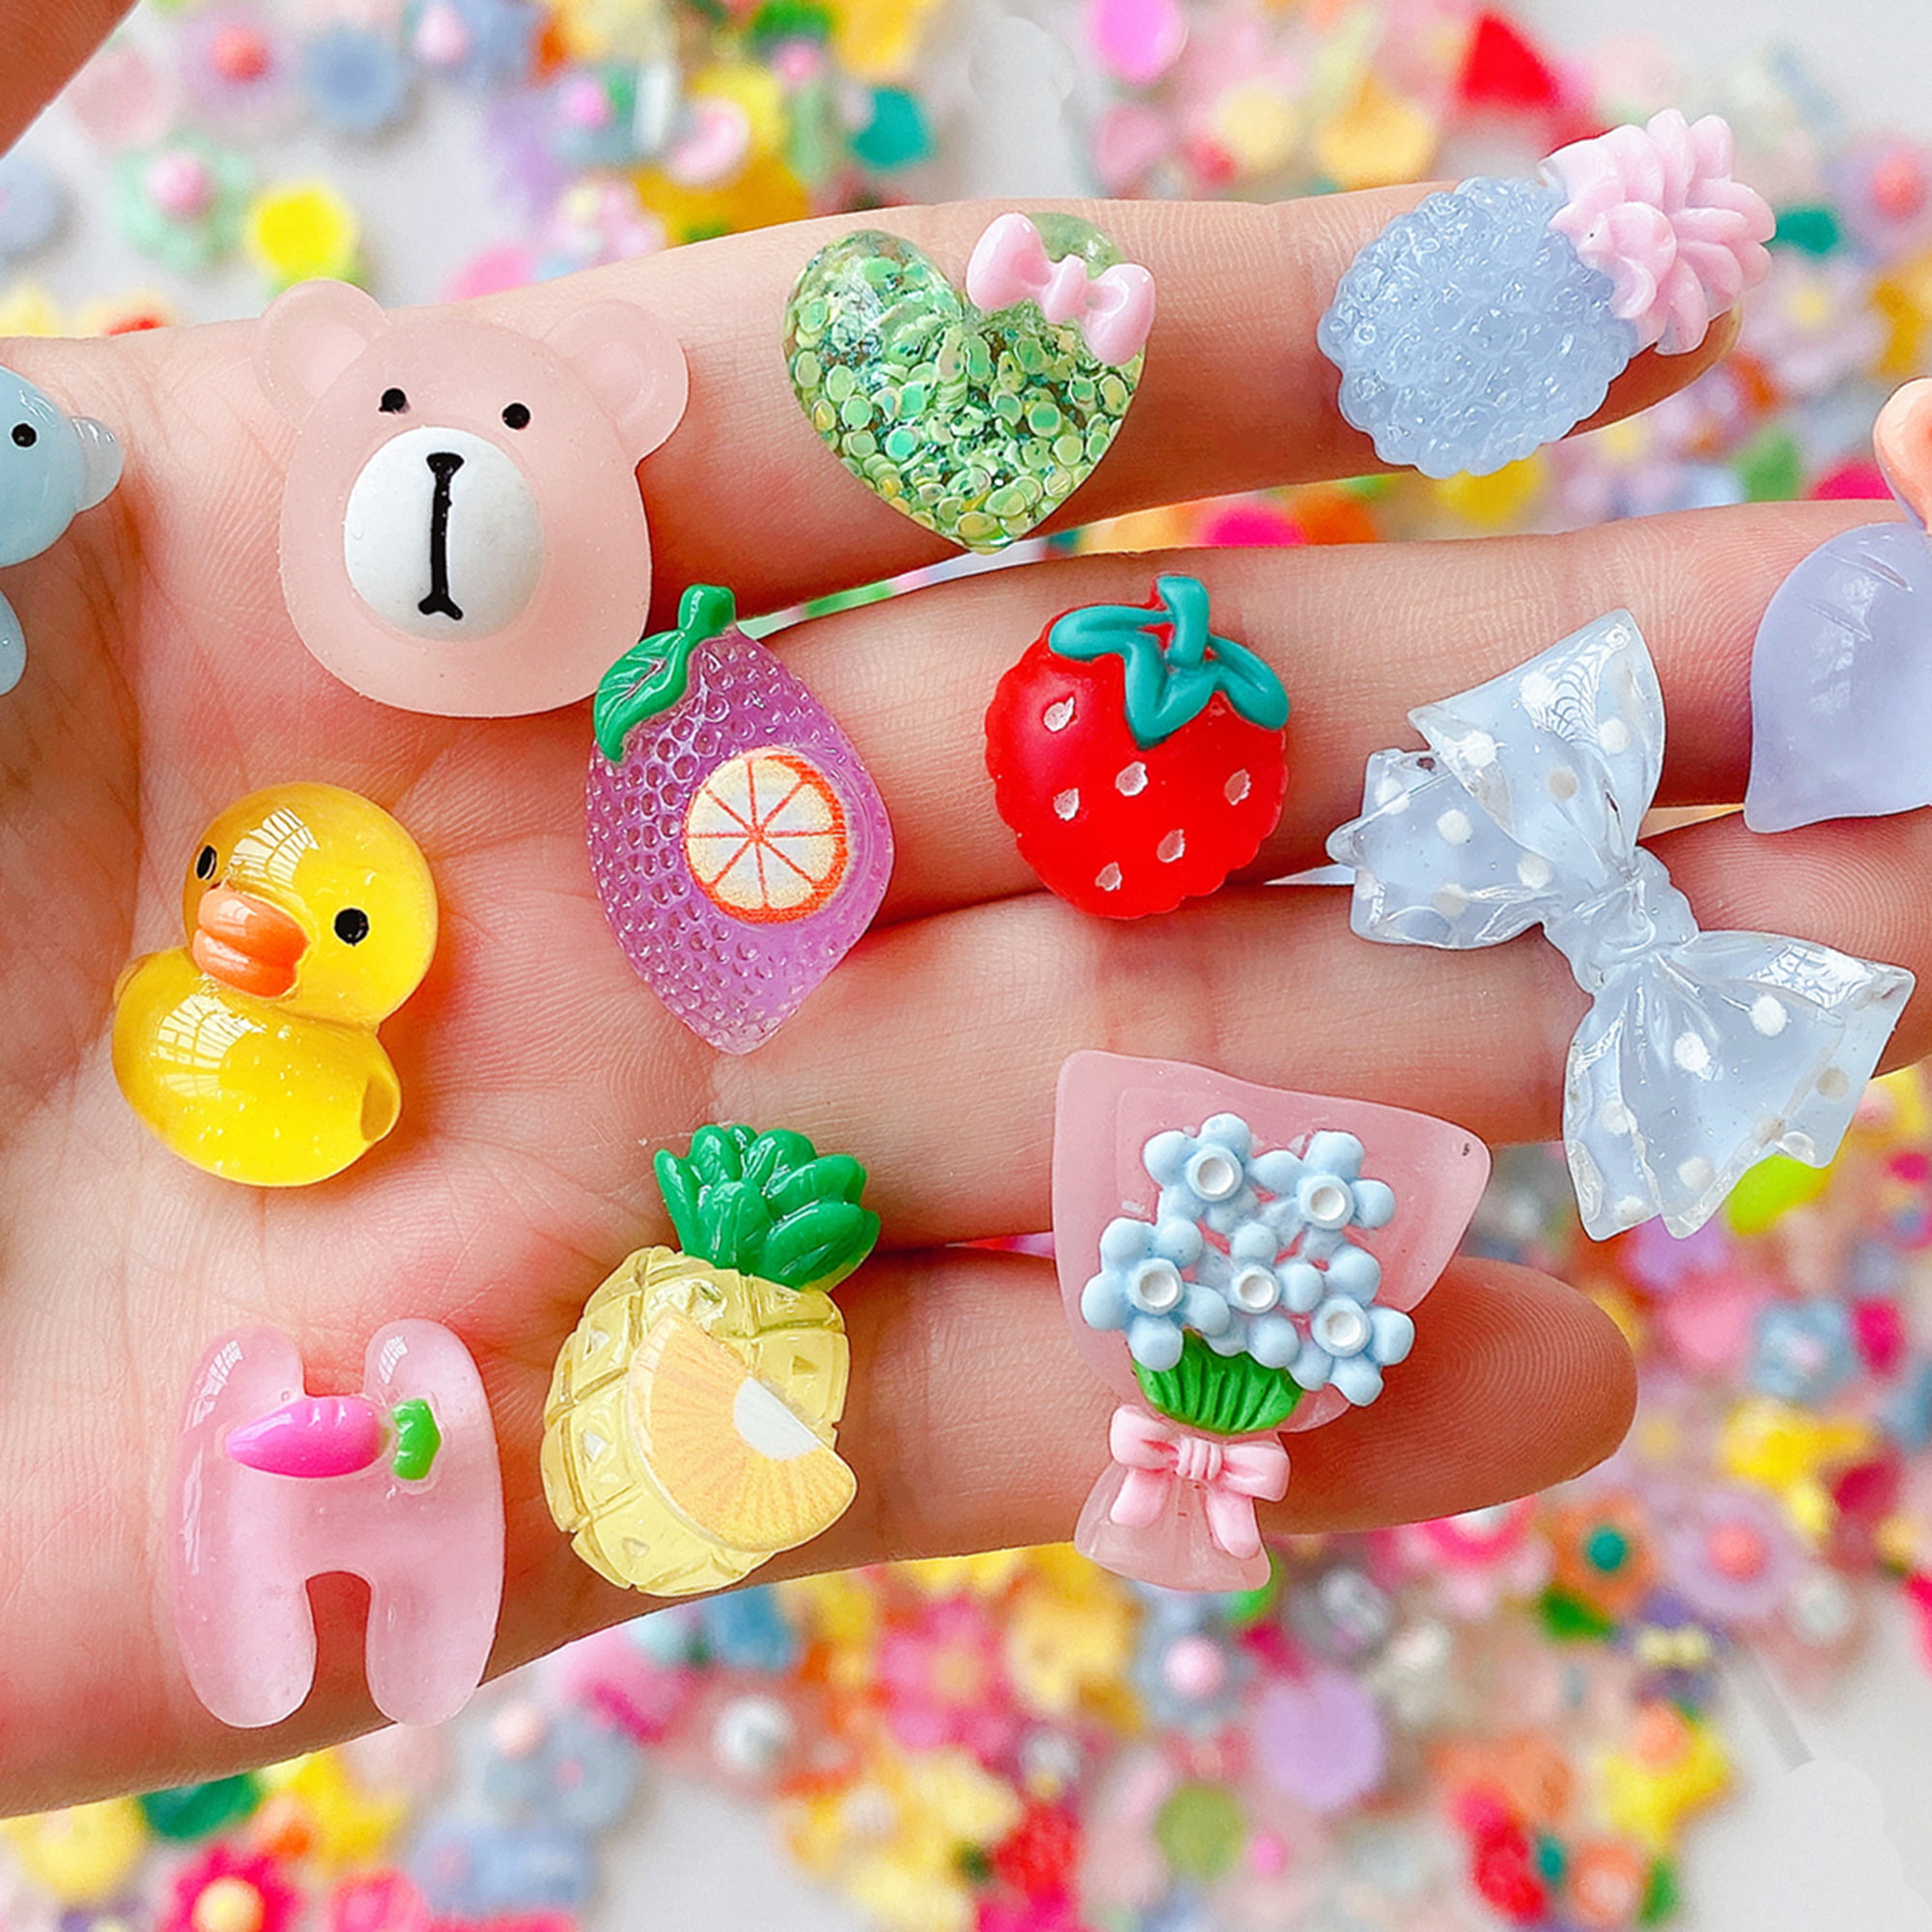 10pcs/lot Mixed Charms slime Juice Drink Bottle Resin Plasticine Beads Making  Supplies Lizun DIY Slime